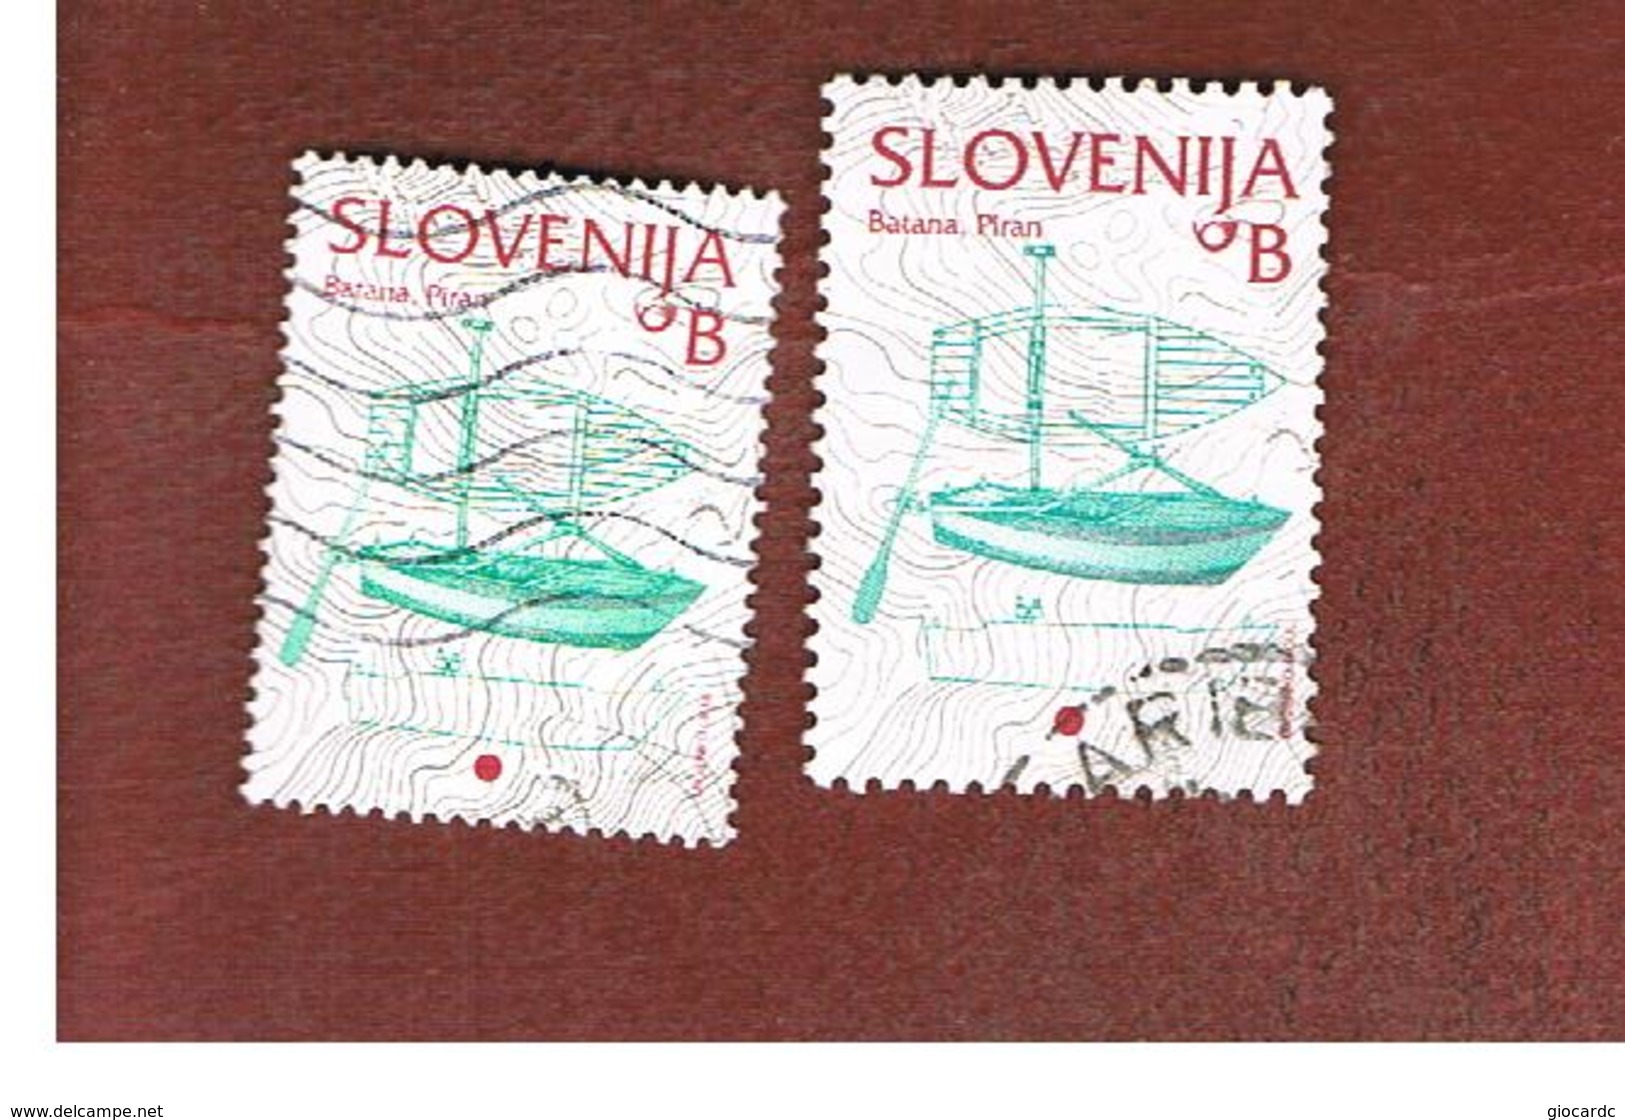 SLOVENIA - MI 444.512 -  2003.2005 CULTURAL HERITAGE: FISHING  BOAT (2 DIFFERENT DIMENSIONS & PERFORATIONS)  -   USED - Slovenia